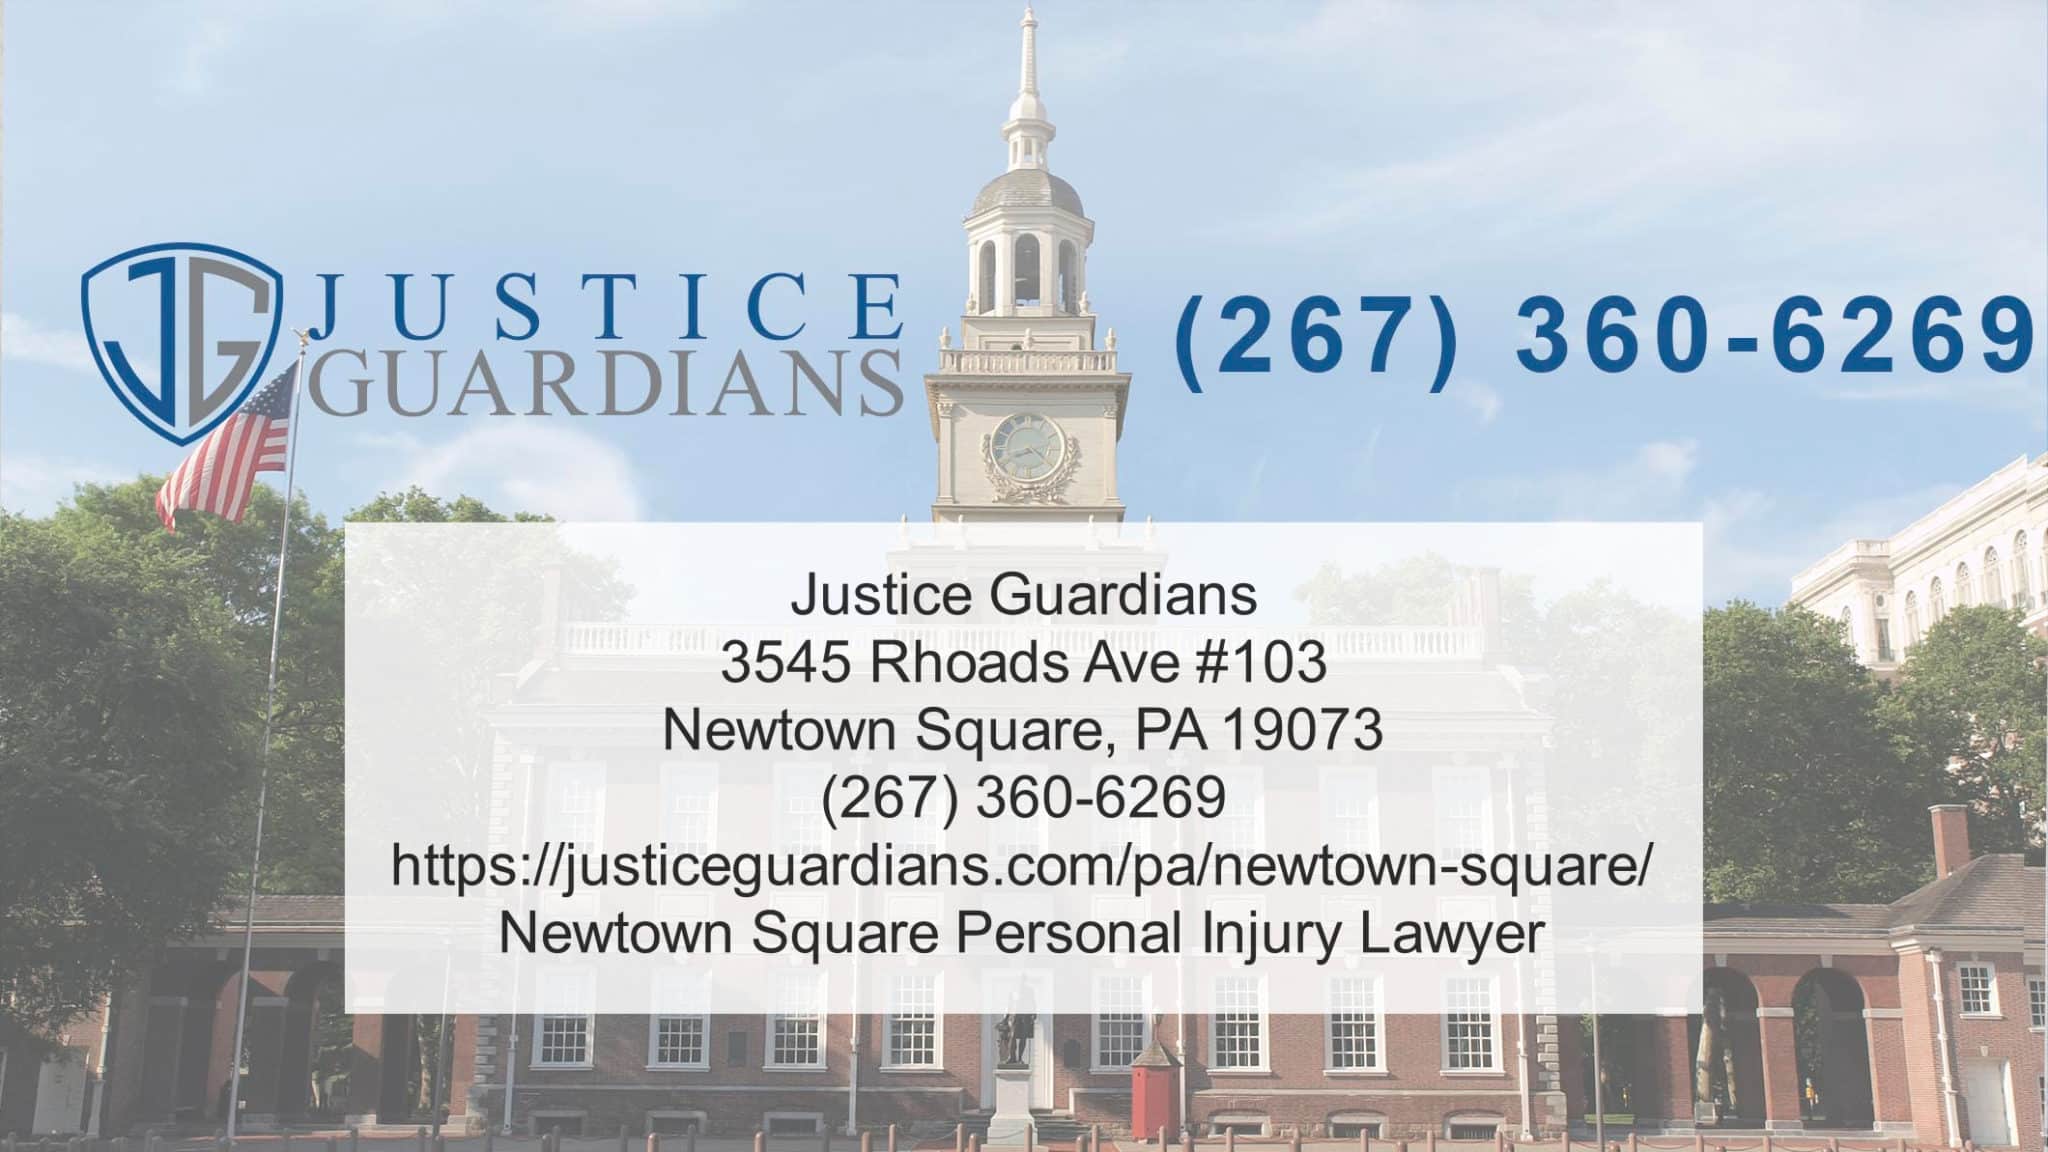 Personal-Injury-Lawyer-Near-Me-Newtown-Square-Justice-Guardians-scaled-1.jpeg